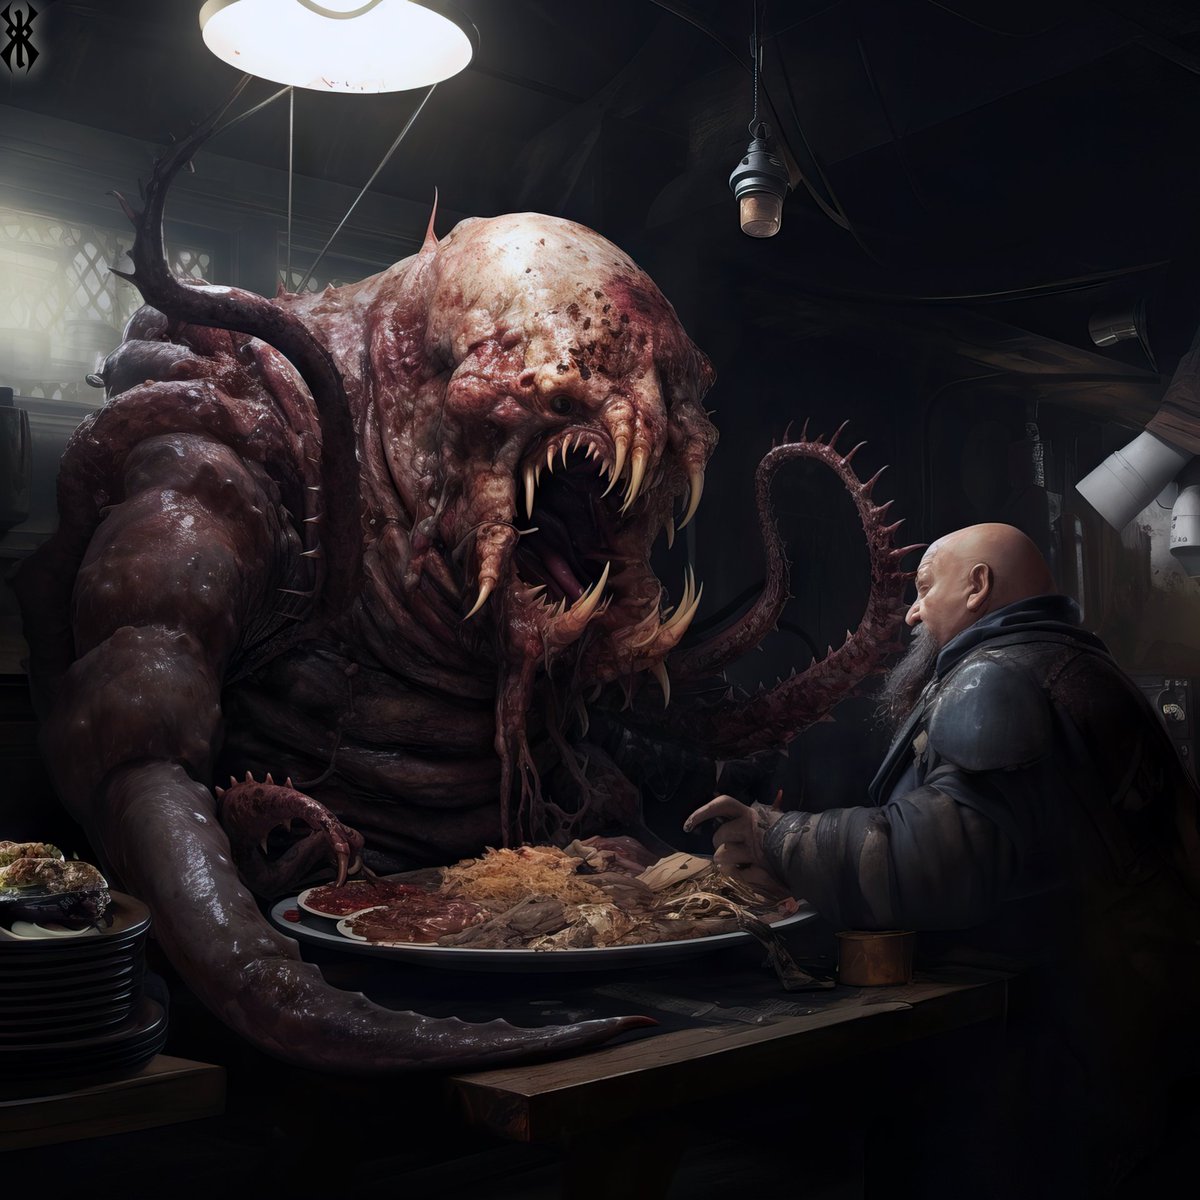 ... crab meat noodle soup ...
#crabmeat #crab #lovecraftian #innsmouth #delicious #crabmeatsalad #noodlesoup #seafood #crabshack #aiia #horrorart #horror #macabreart  #dinnertime #monsters #creatures #seamonster